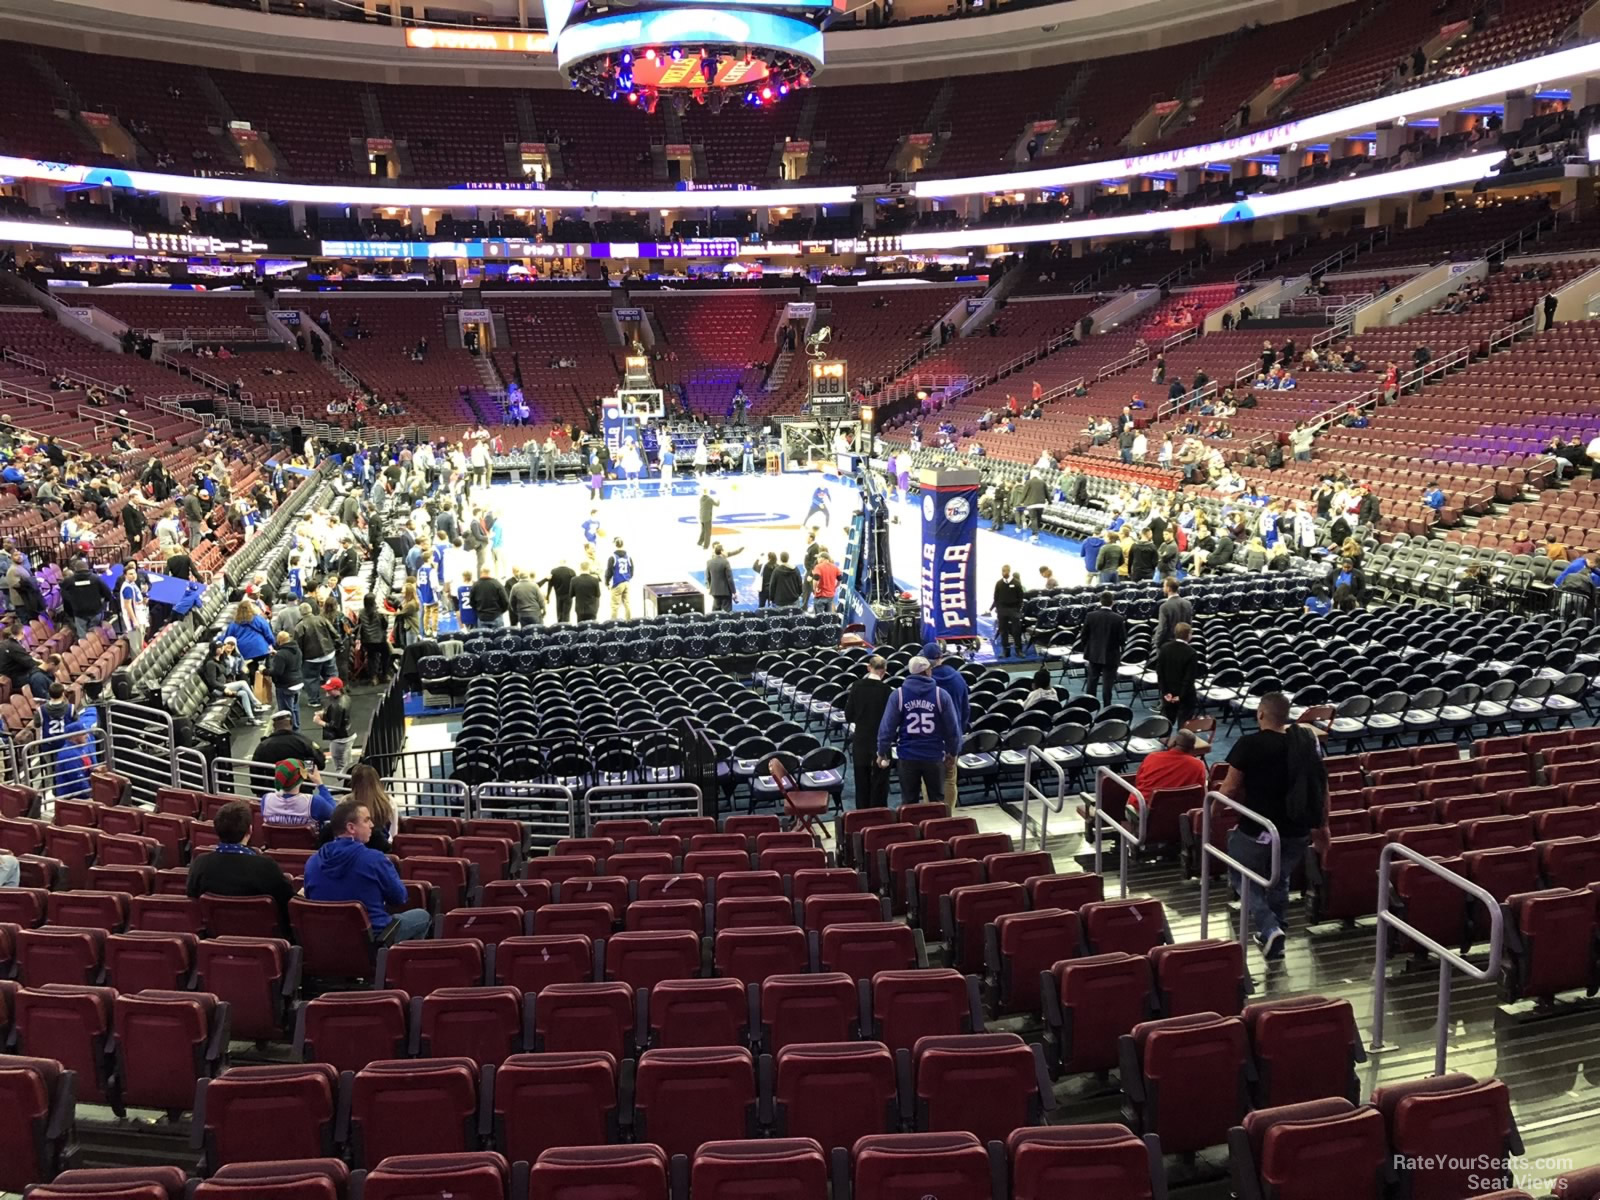 section 106, row 14 seat view  for basketball - wells fargo center